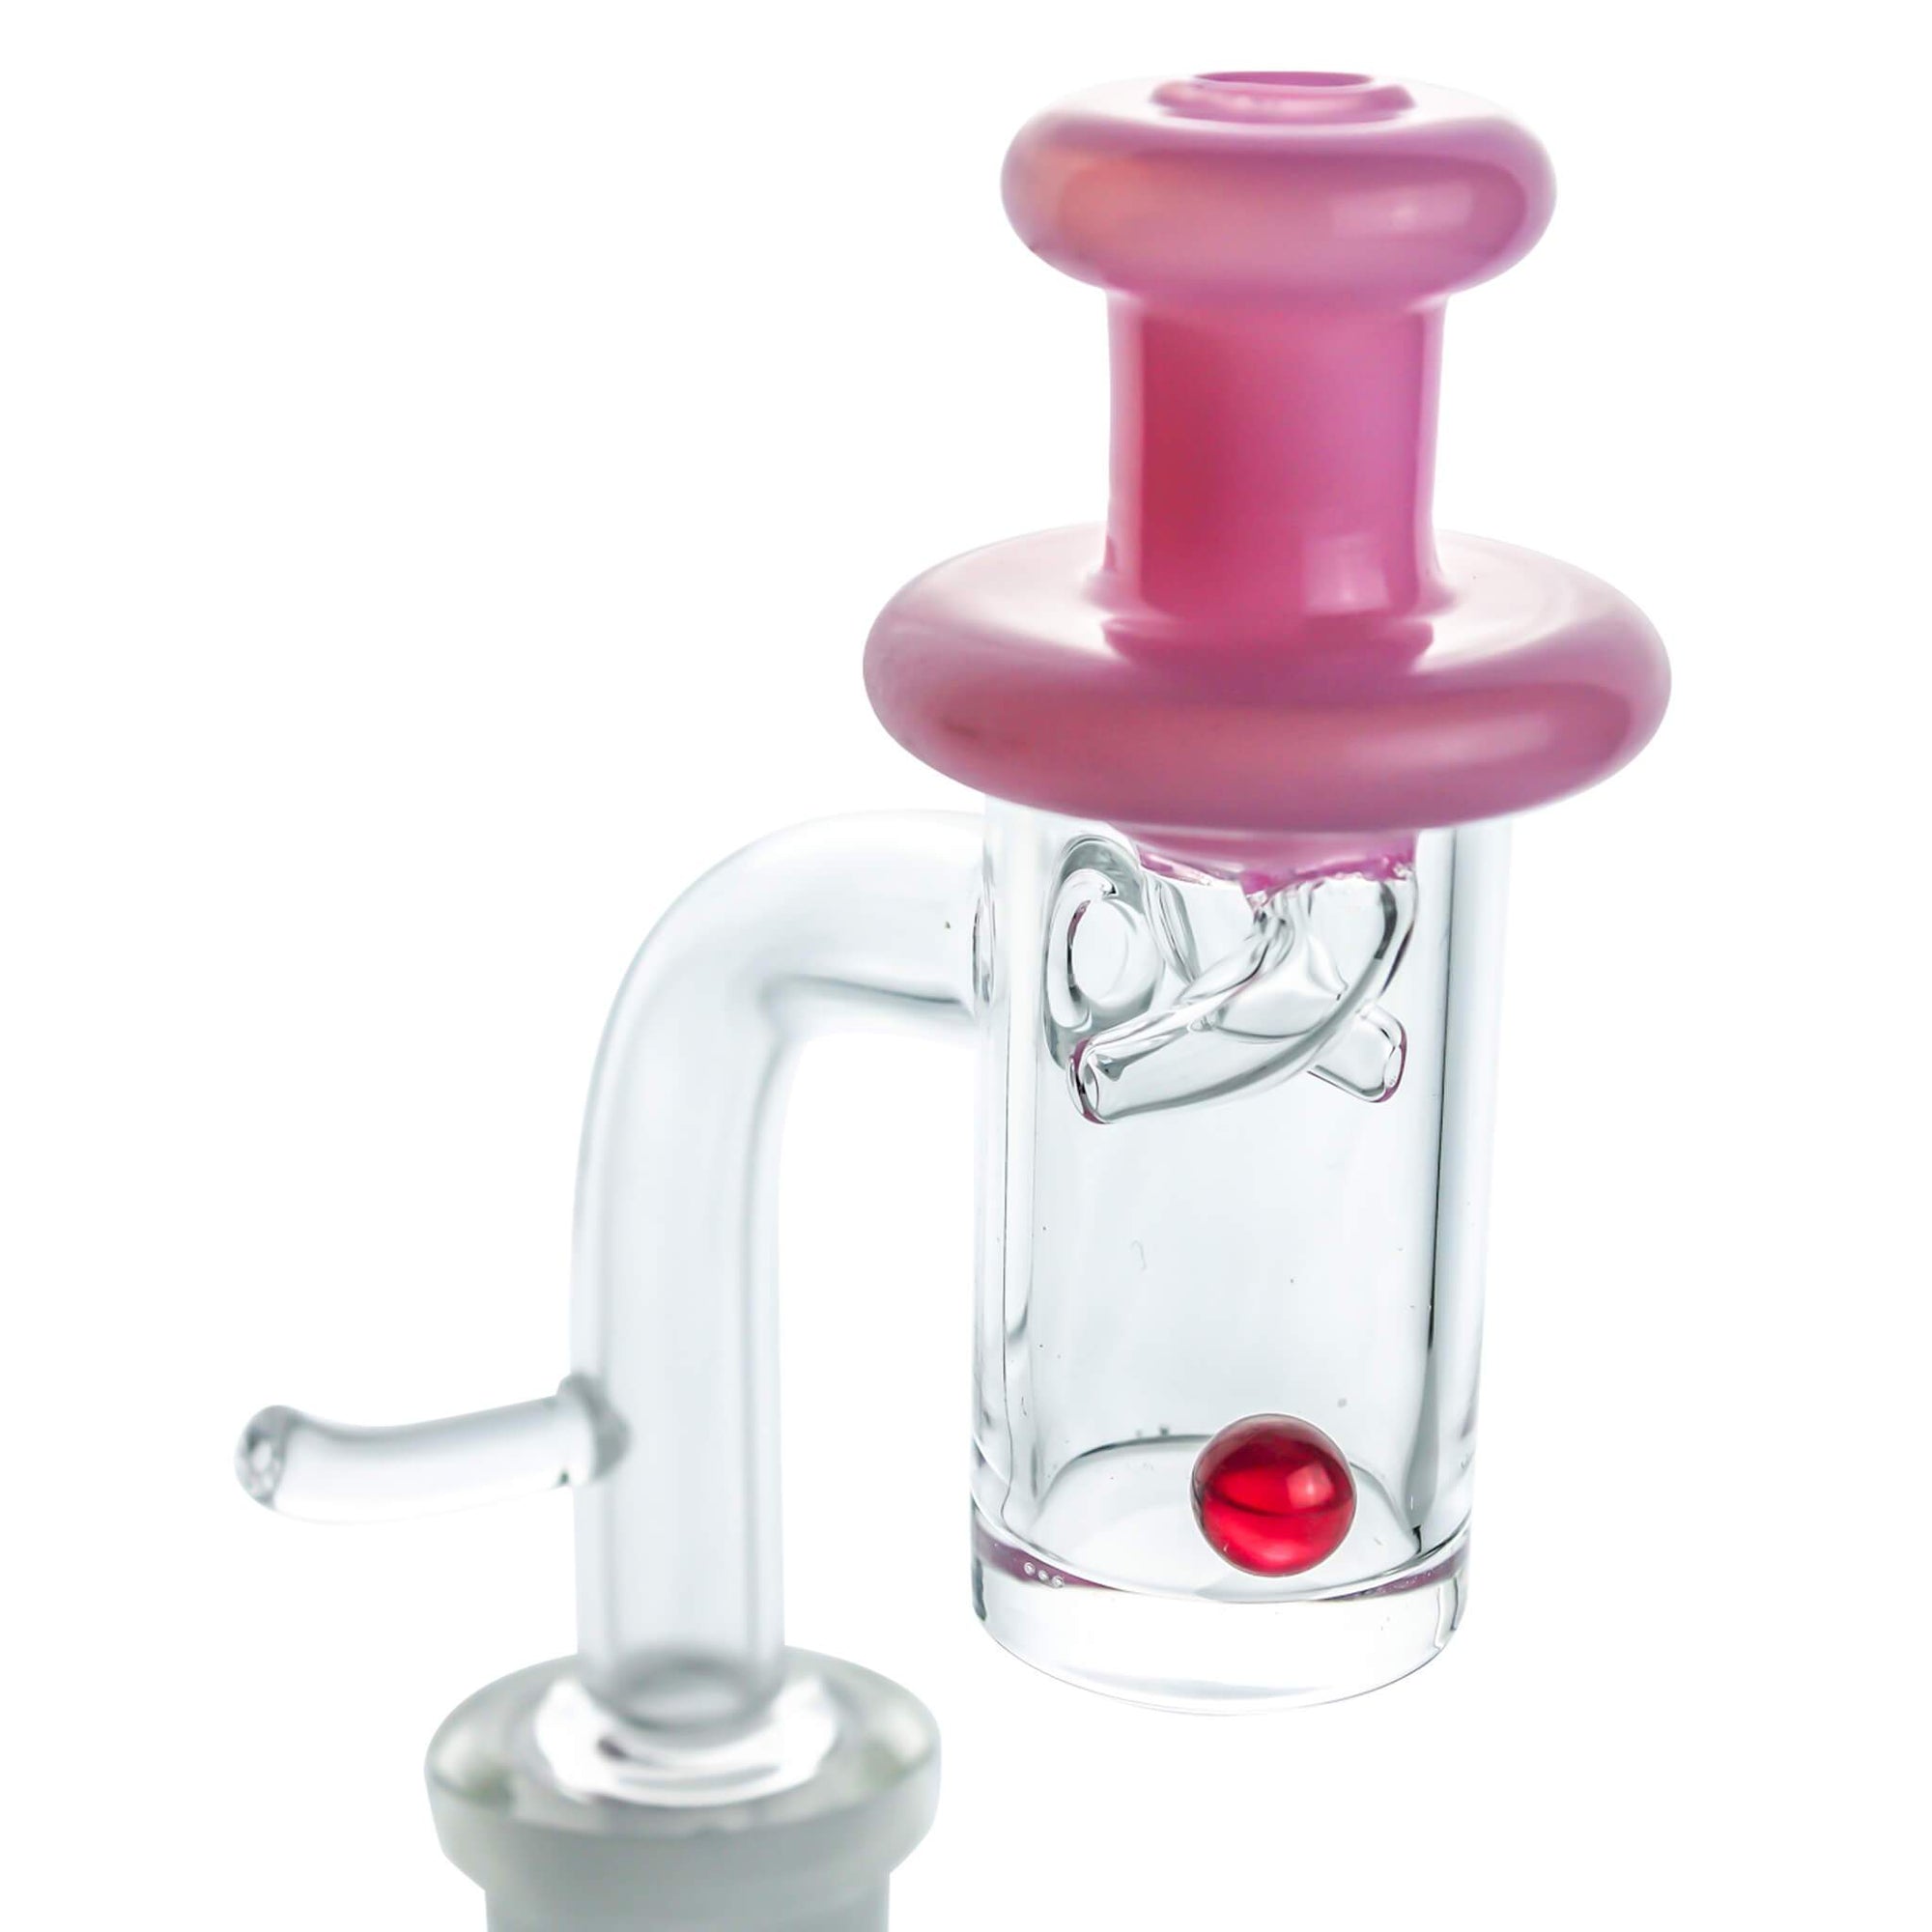 E-Banger for 20mm Coil, Dual Nozzle Cap, and 6mm Ruby Terp Pearl Combo | Pink Cap On Banger | DW